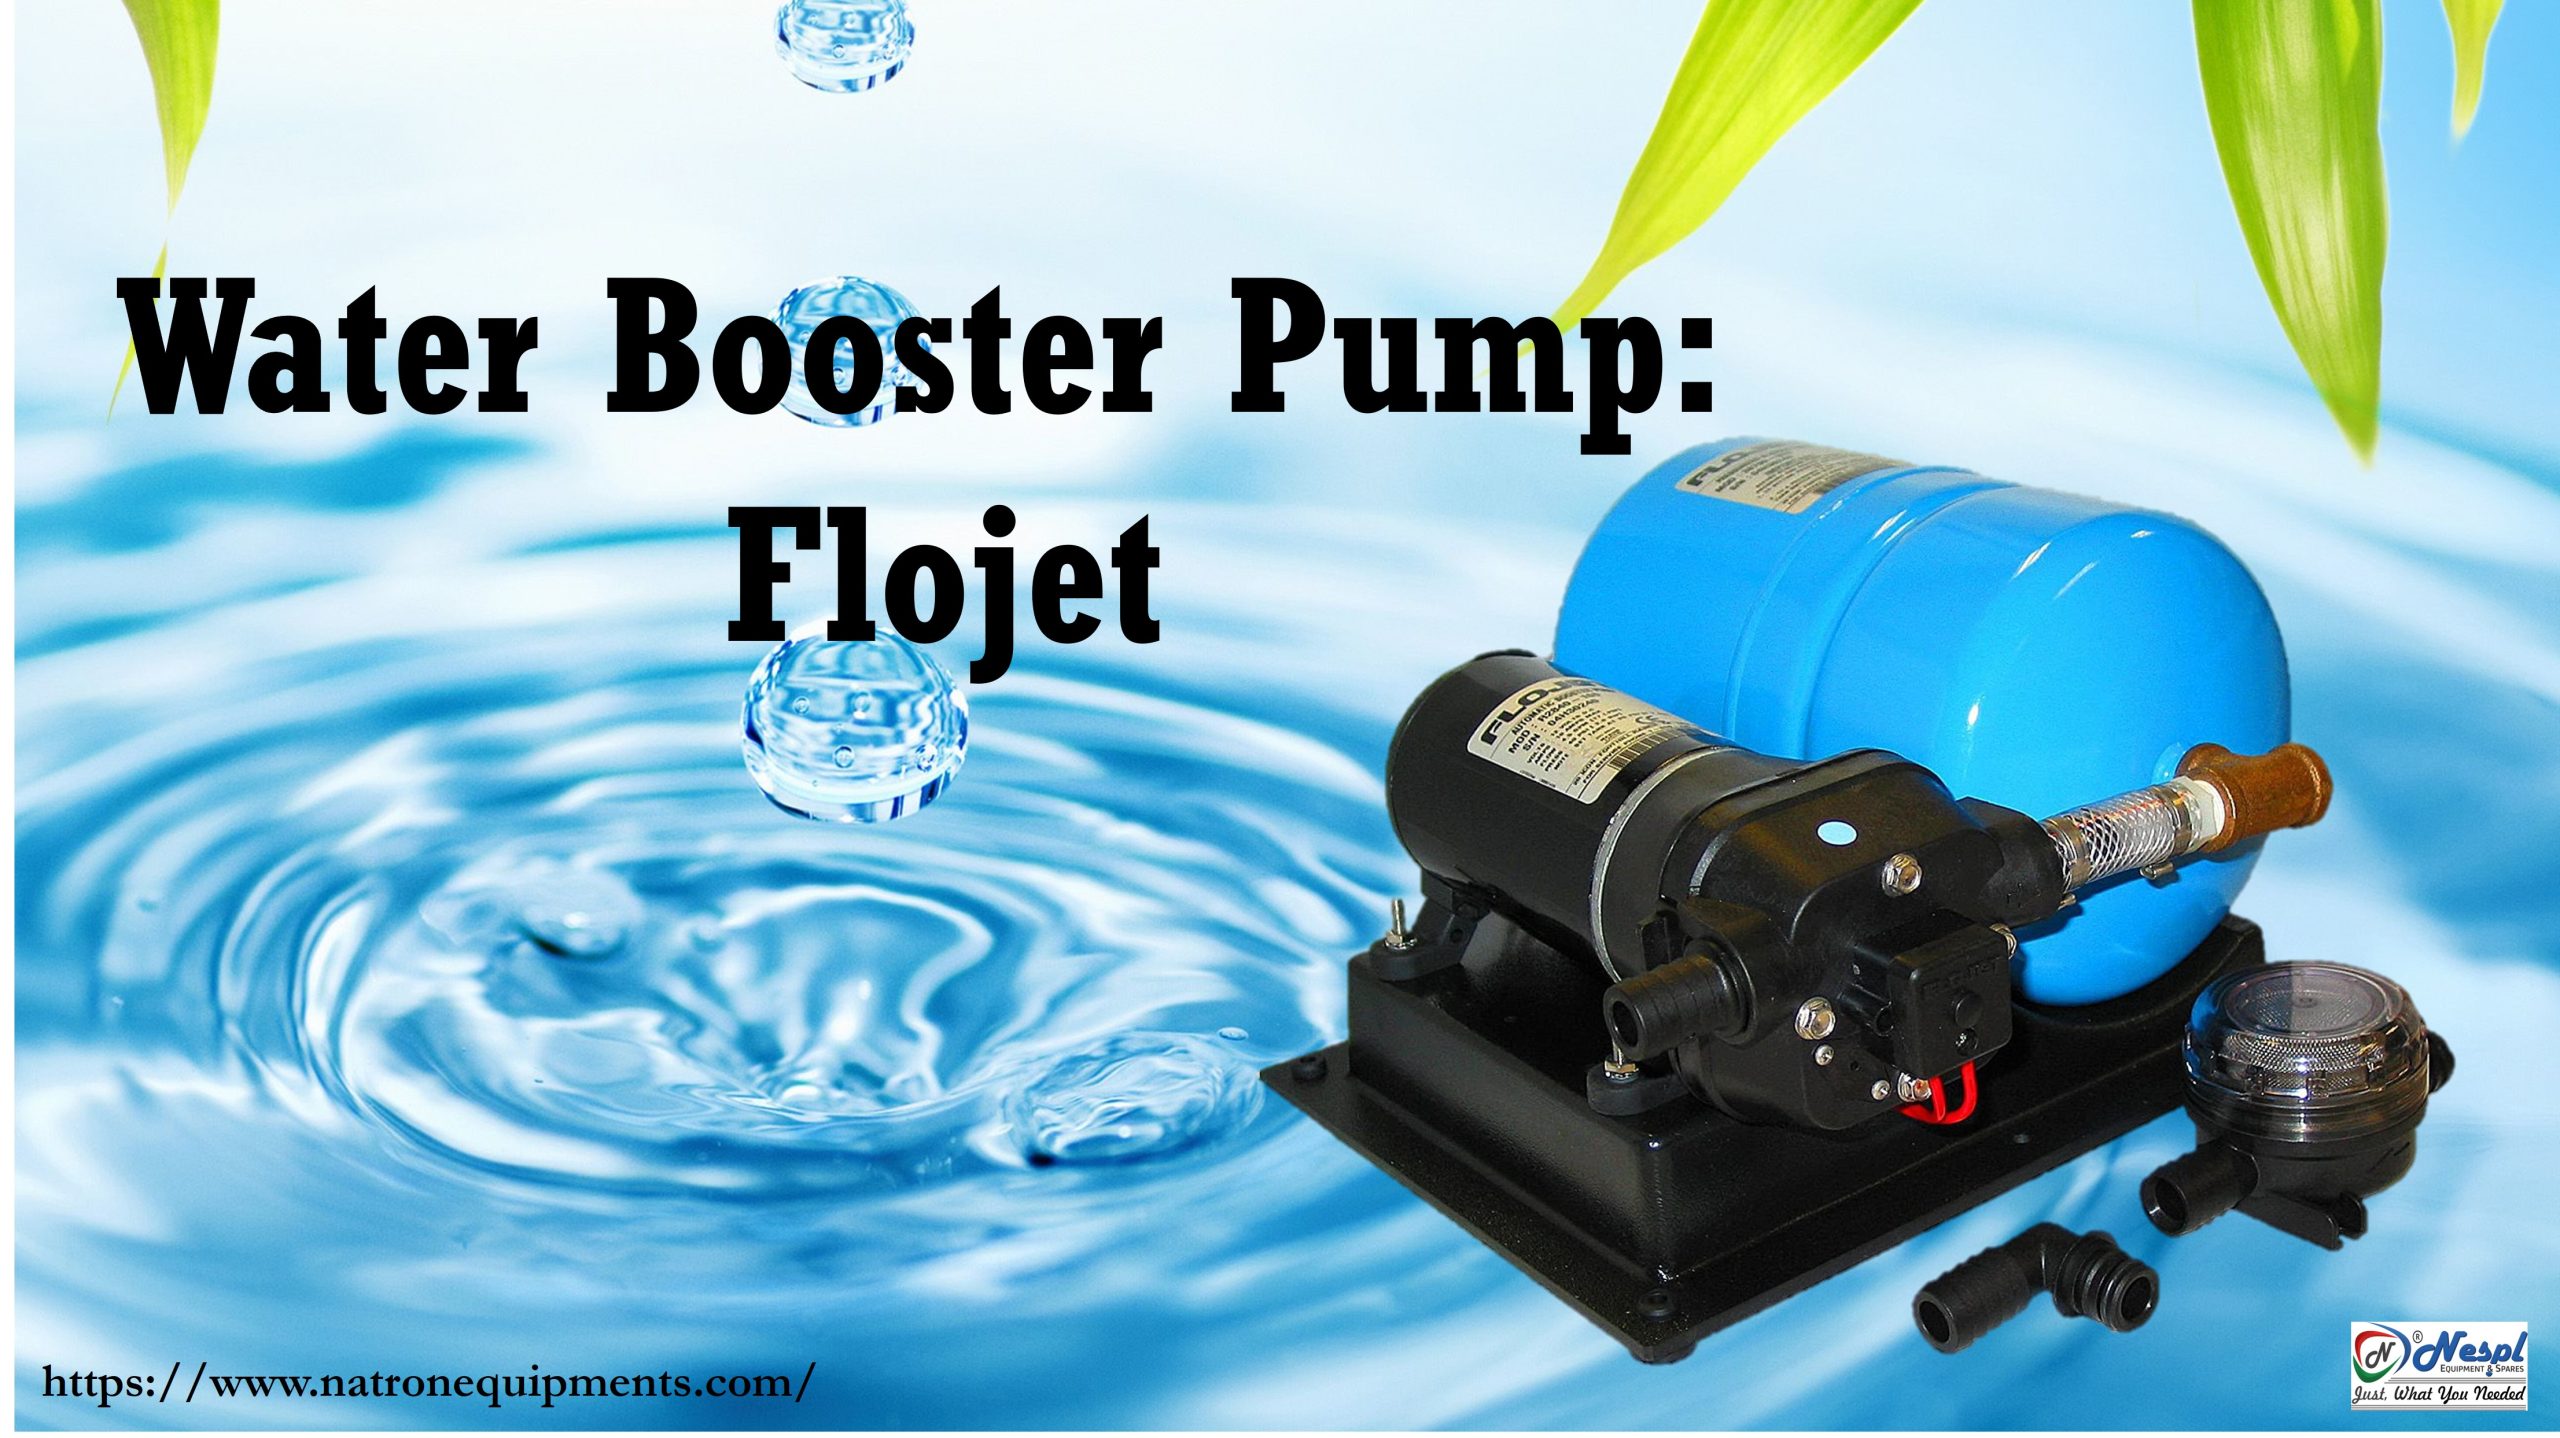 Useful information on booster pumps - An Pump Machinery